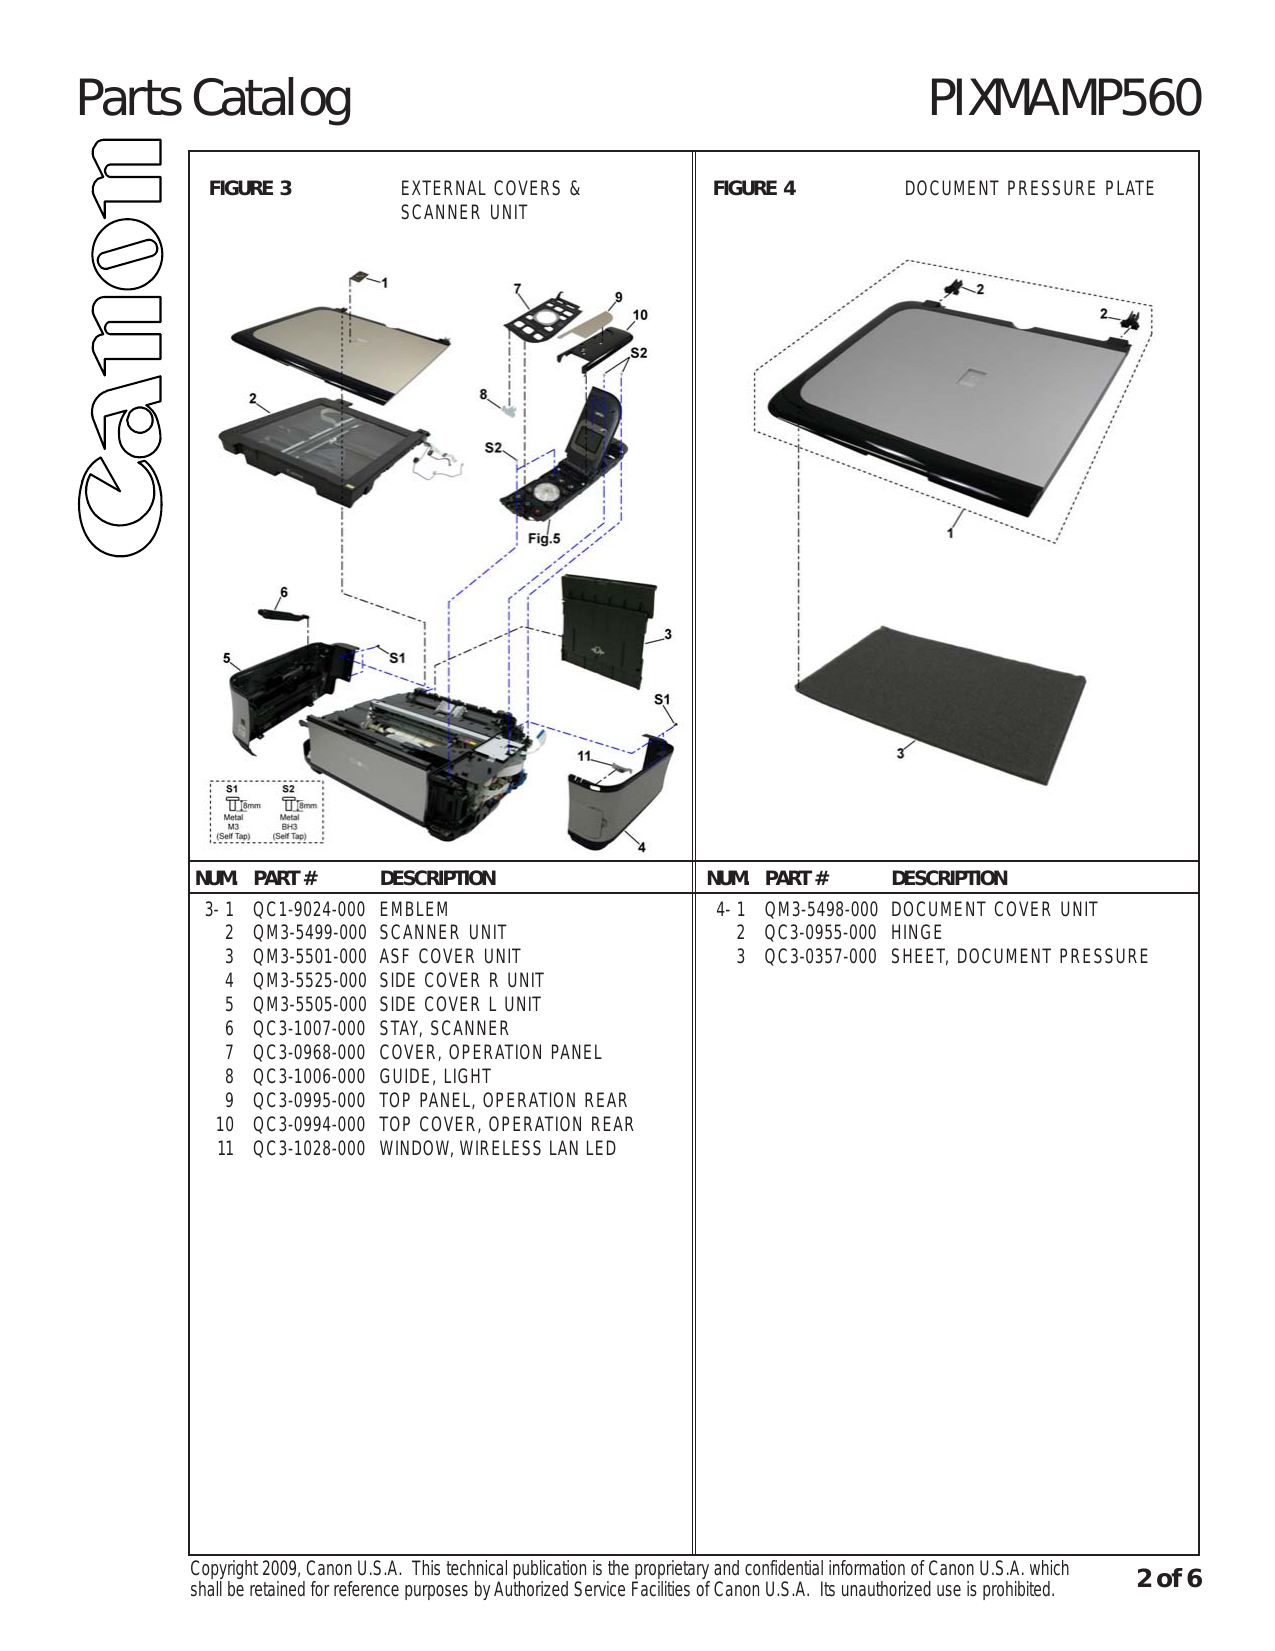 Canon Pixma MP560 all-in-one inkjet printer parts catalog Preview image 3